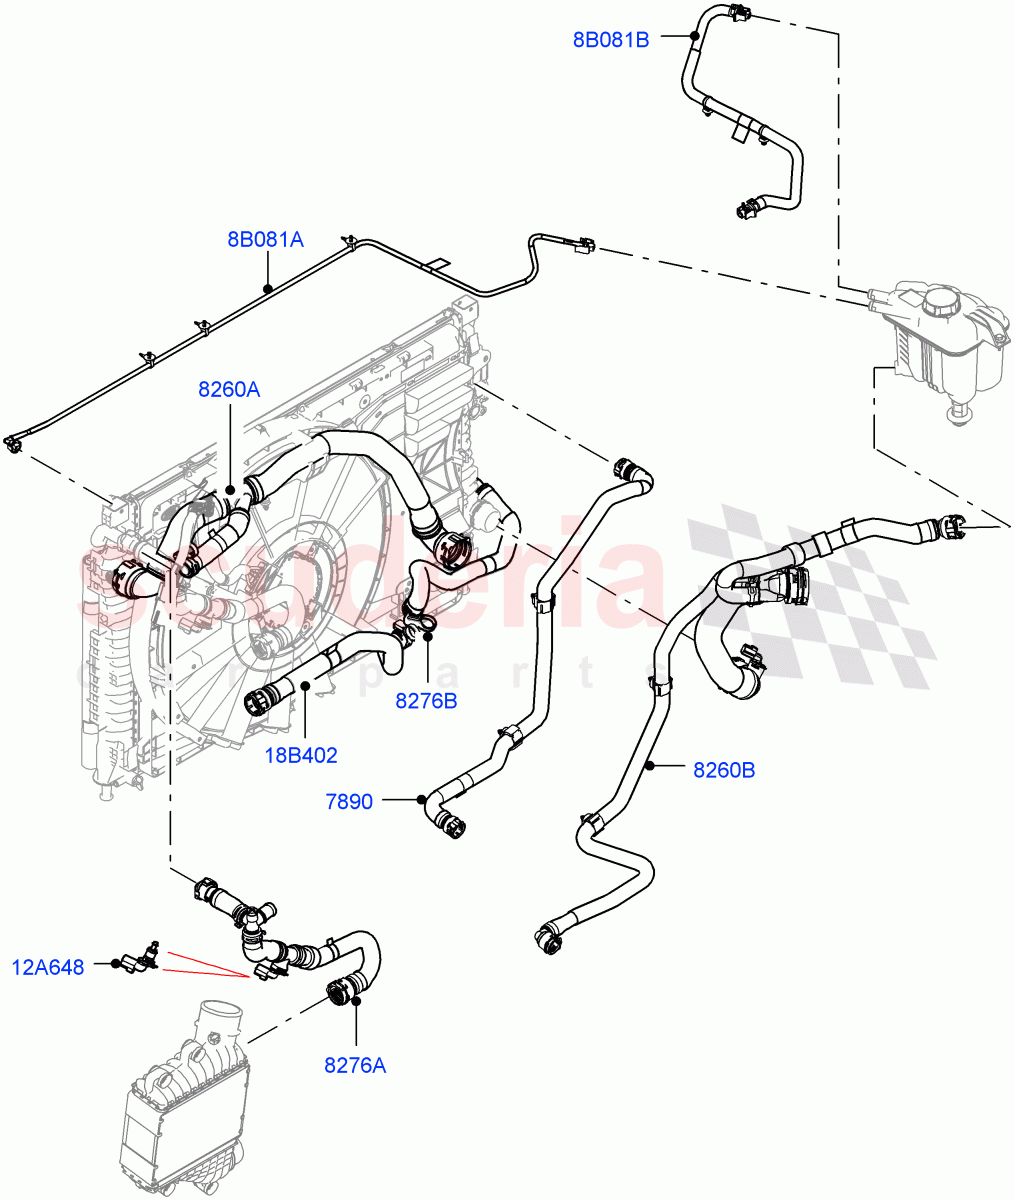 Cooling System Pipes And Hoses(2.0L AJ21D4 Diesel Mid,9 Speed Auto Trans 9HP50,Halewood (UK))((V)FROMMH000001) of Land Rover Land Rover Range Rover Evoque (2019+) [2.0 Turbo Diesel AJ21D4]